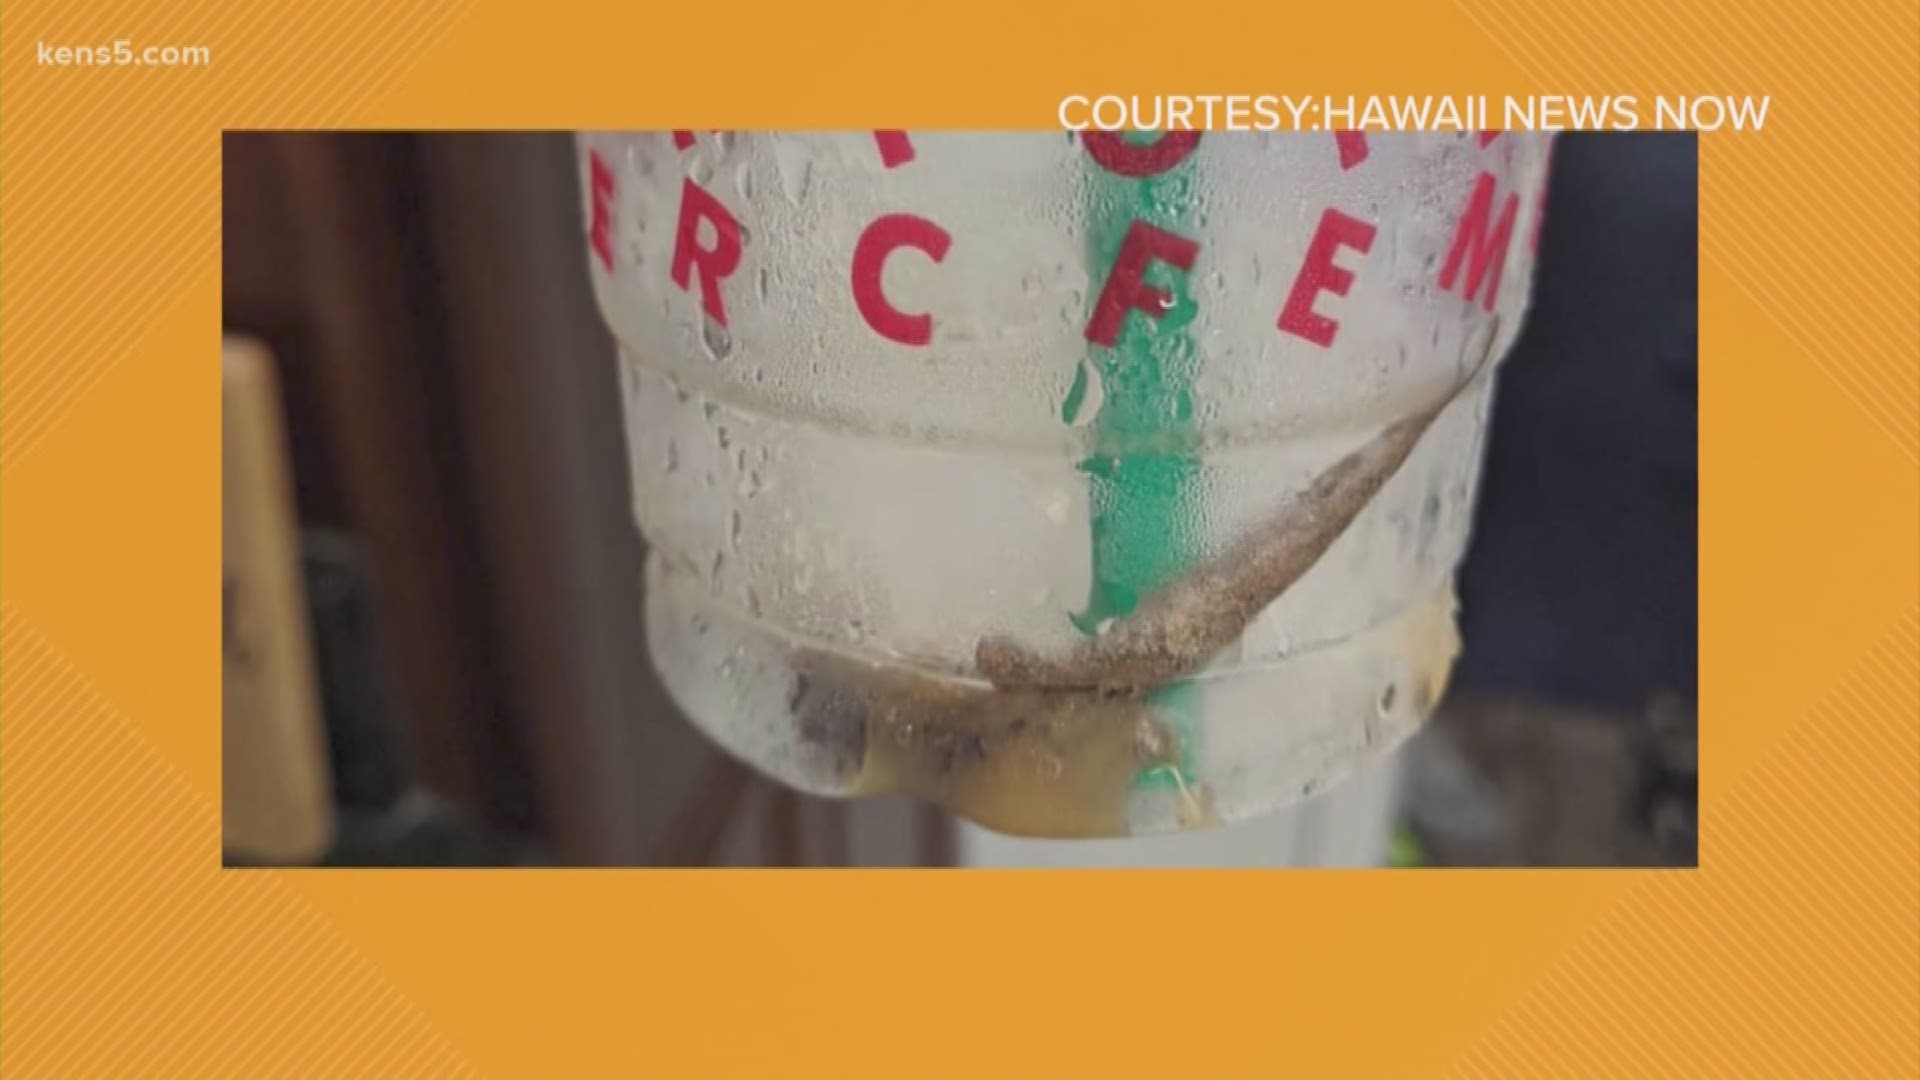 A man in Hawaii claims he finished his Starbucks Cold Brew and then found a dead lizard at the bottom of the cup.